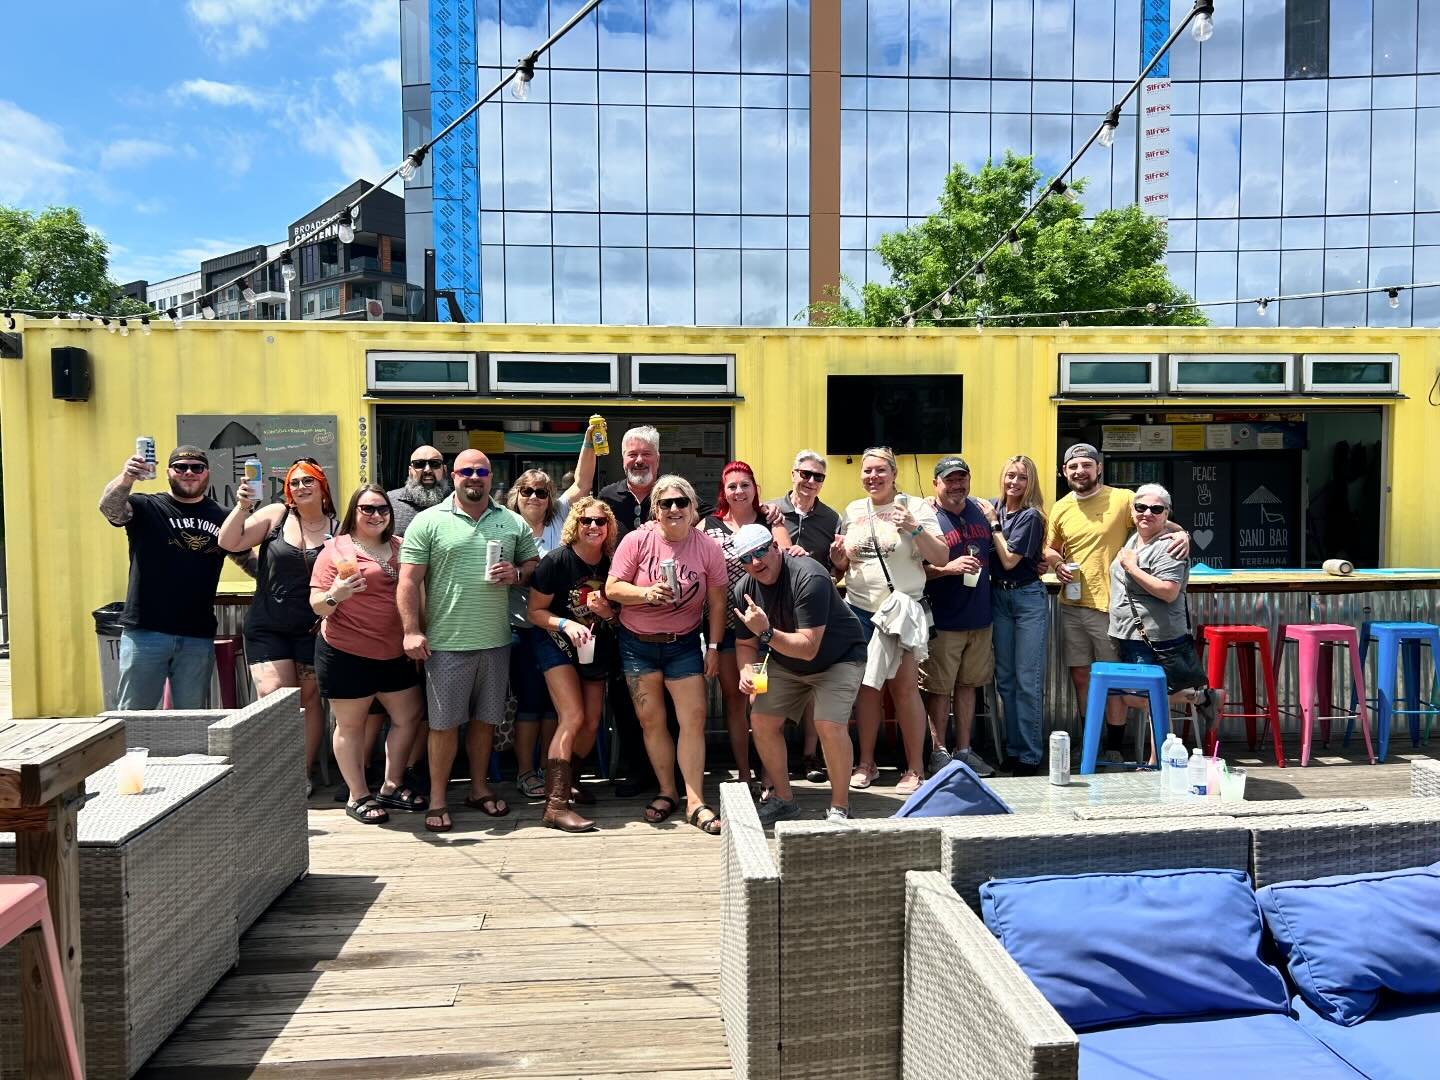 We know a lot of you are coming in town to visit that follow us. 🤗 If you&rsquo;re looking for something fun to do check out Ray and his @nashvilledivebarshuttle. We are absolutely thrilled to be one of his stops and he is nonstop entertainment. 🥳?